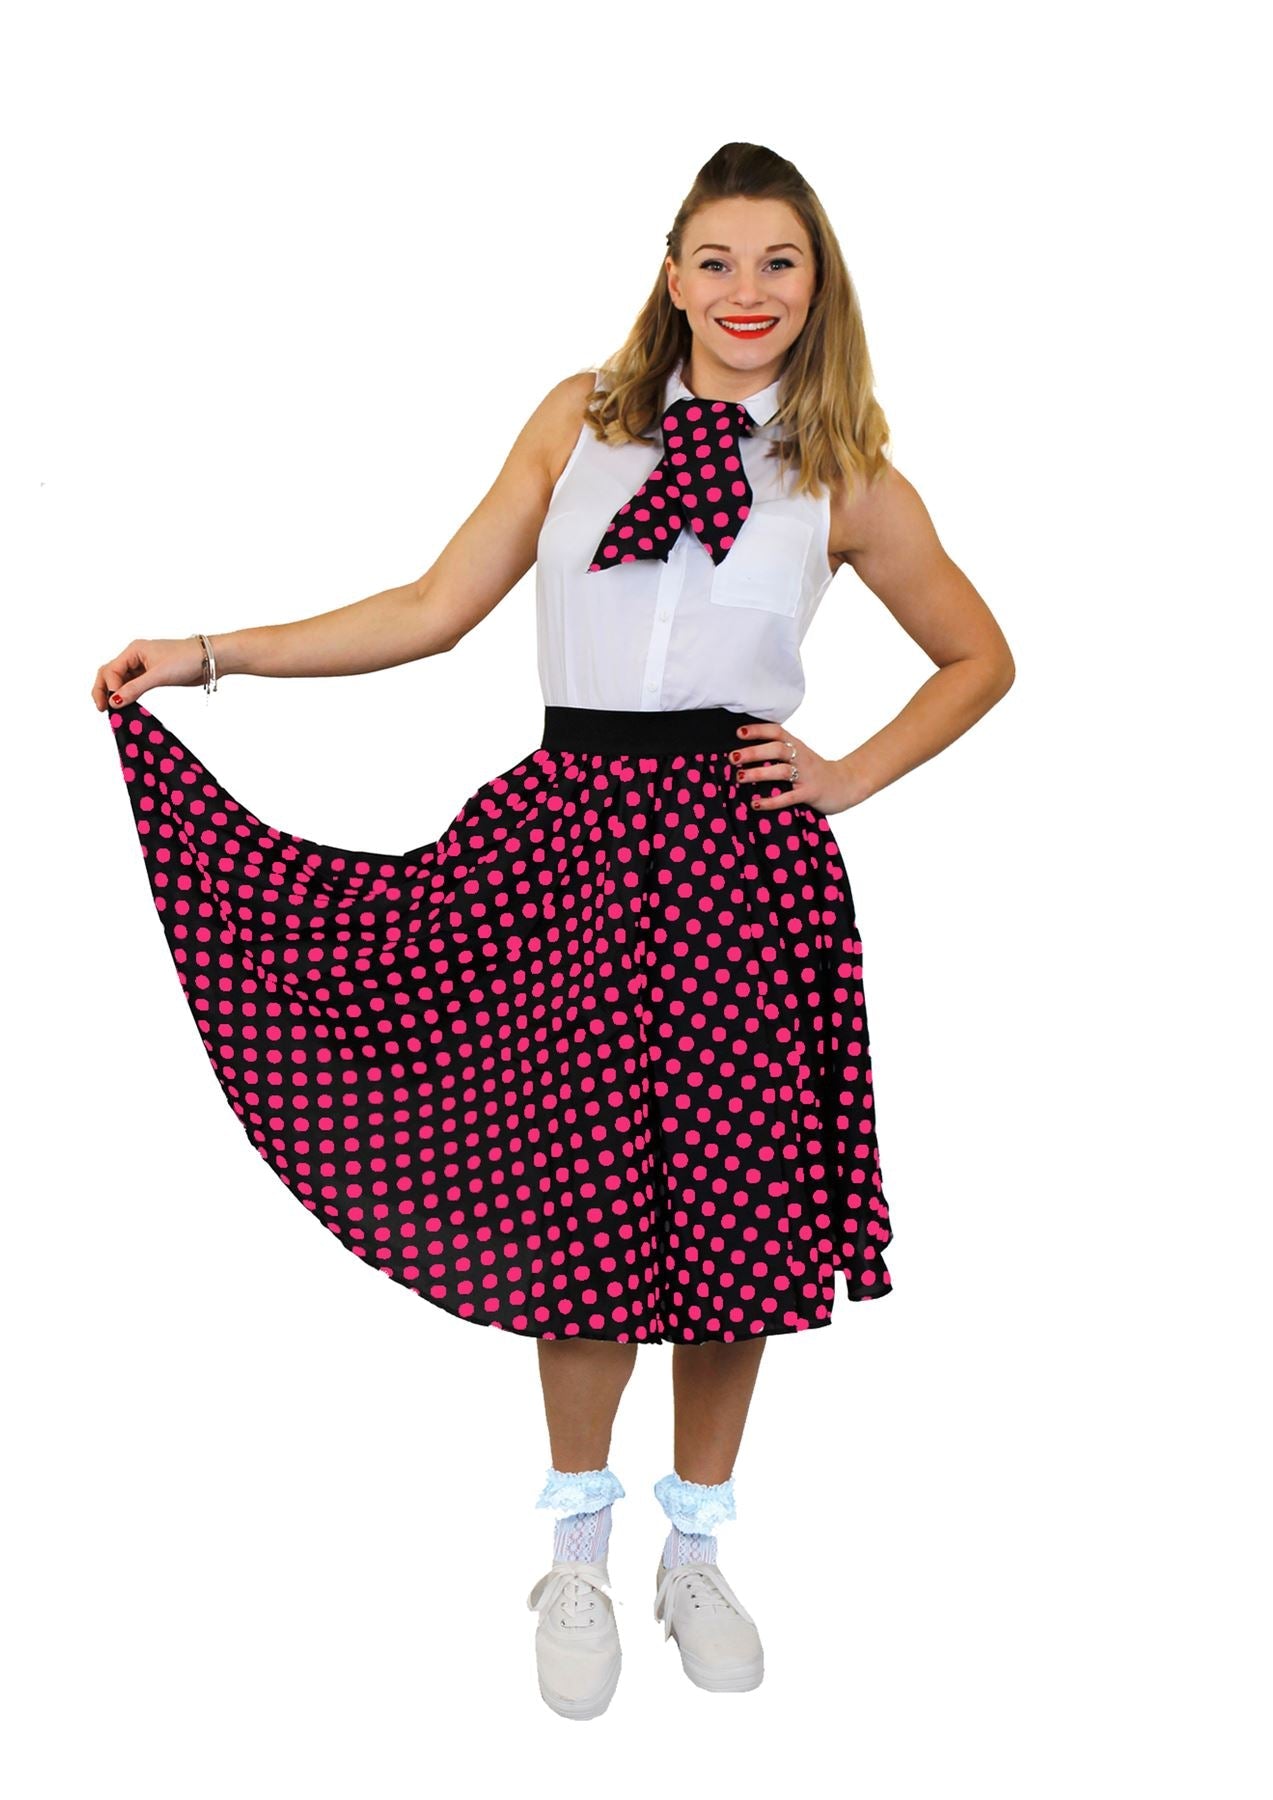 Long Black Polka Dot 1950s Rock n Roll Skirt and Scarf Set includes Black polka dot skirt with pink spots and elasticated waist and matching neck scarf. Skirt length 26 inches